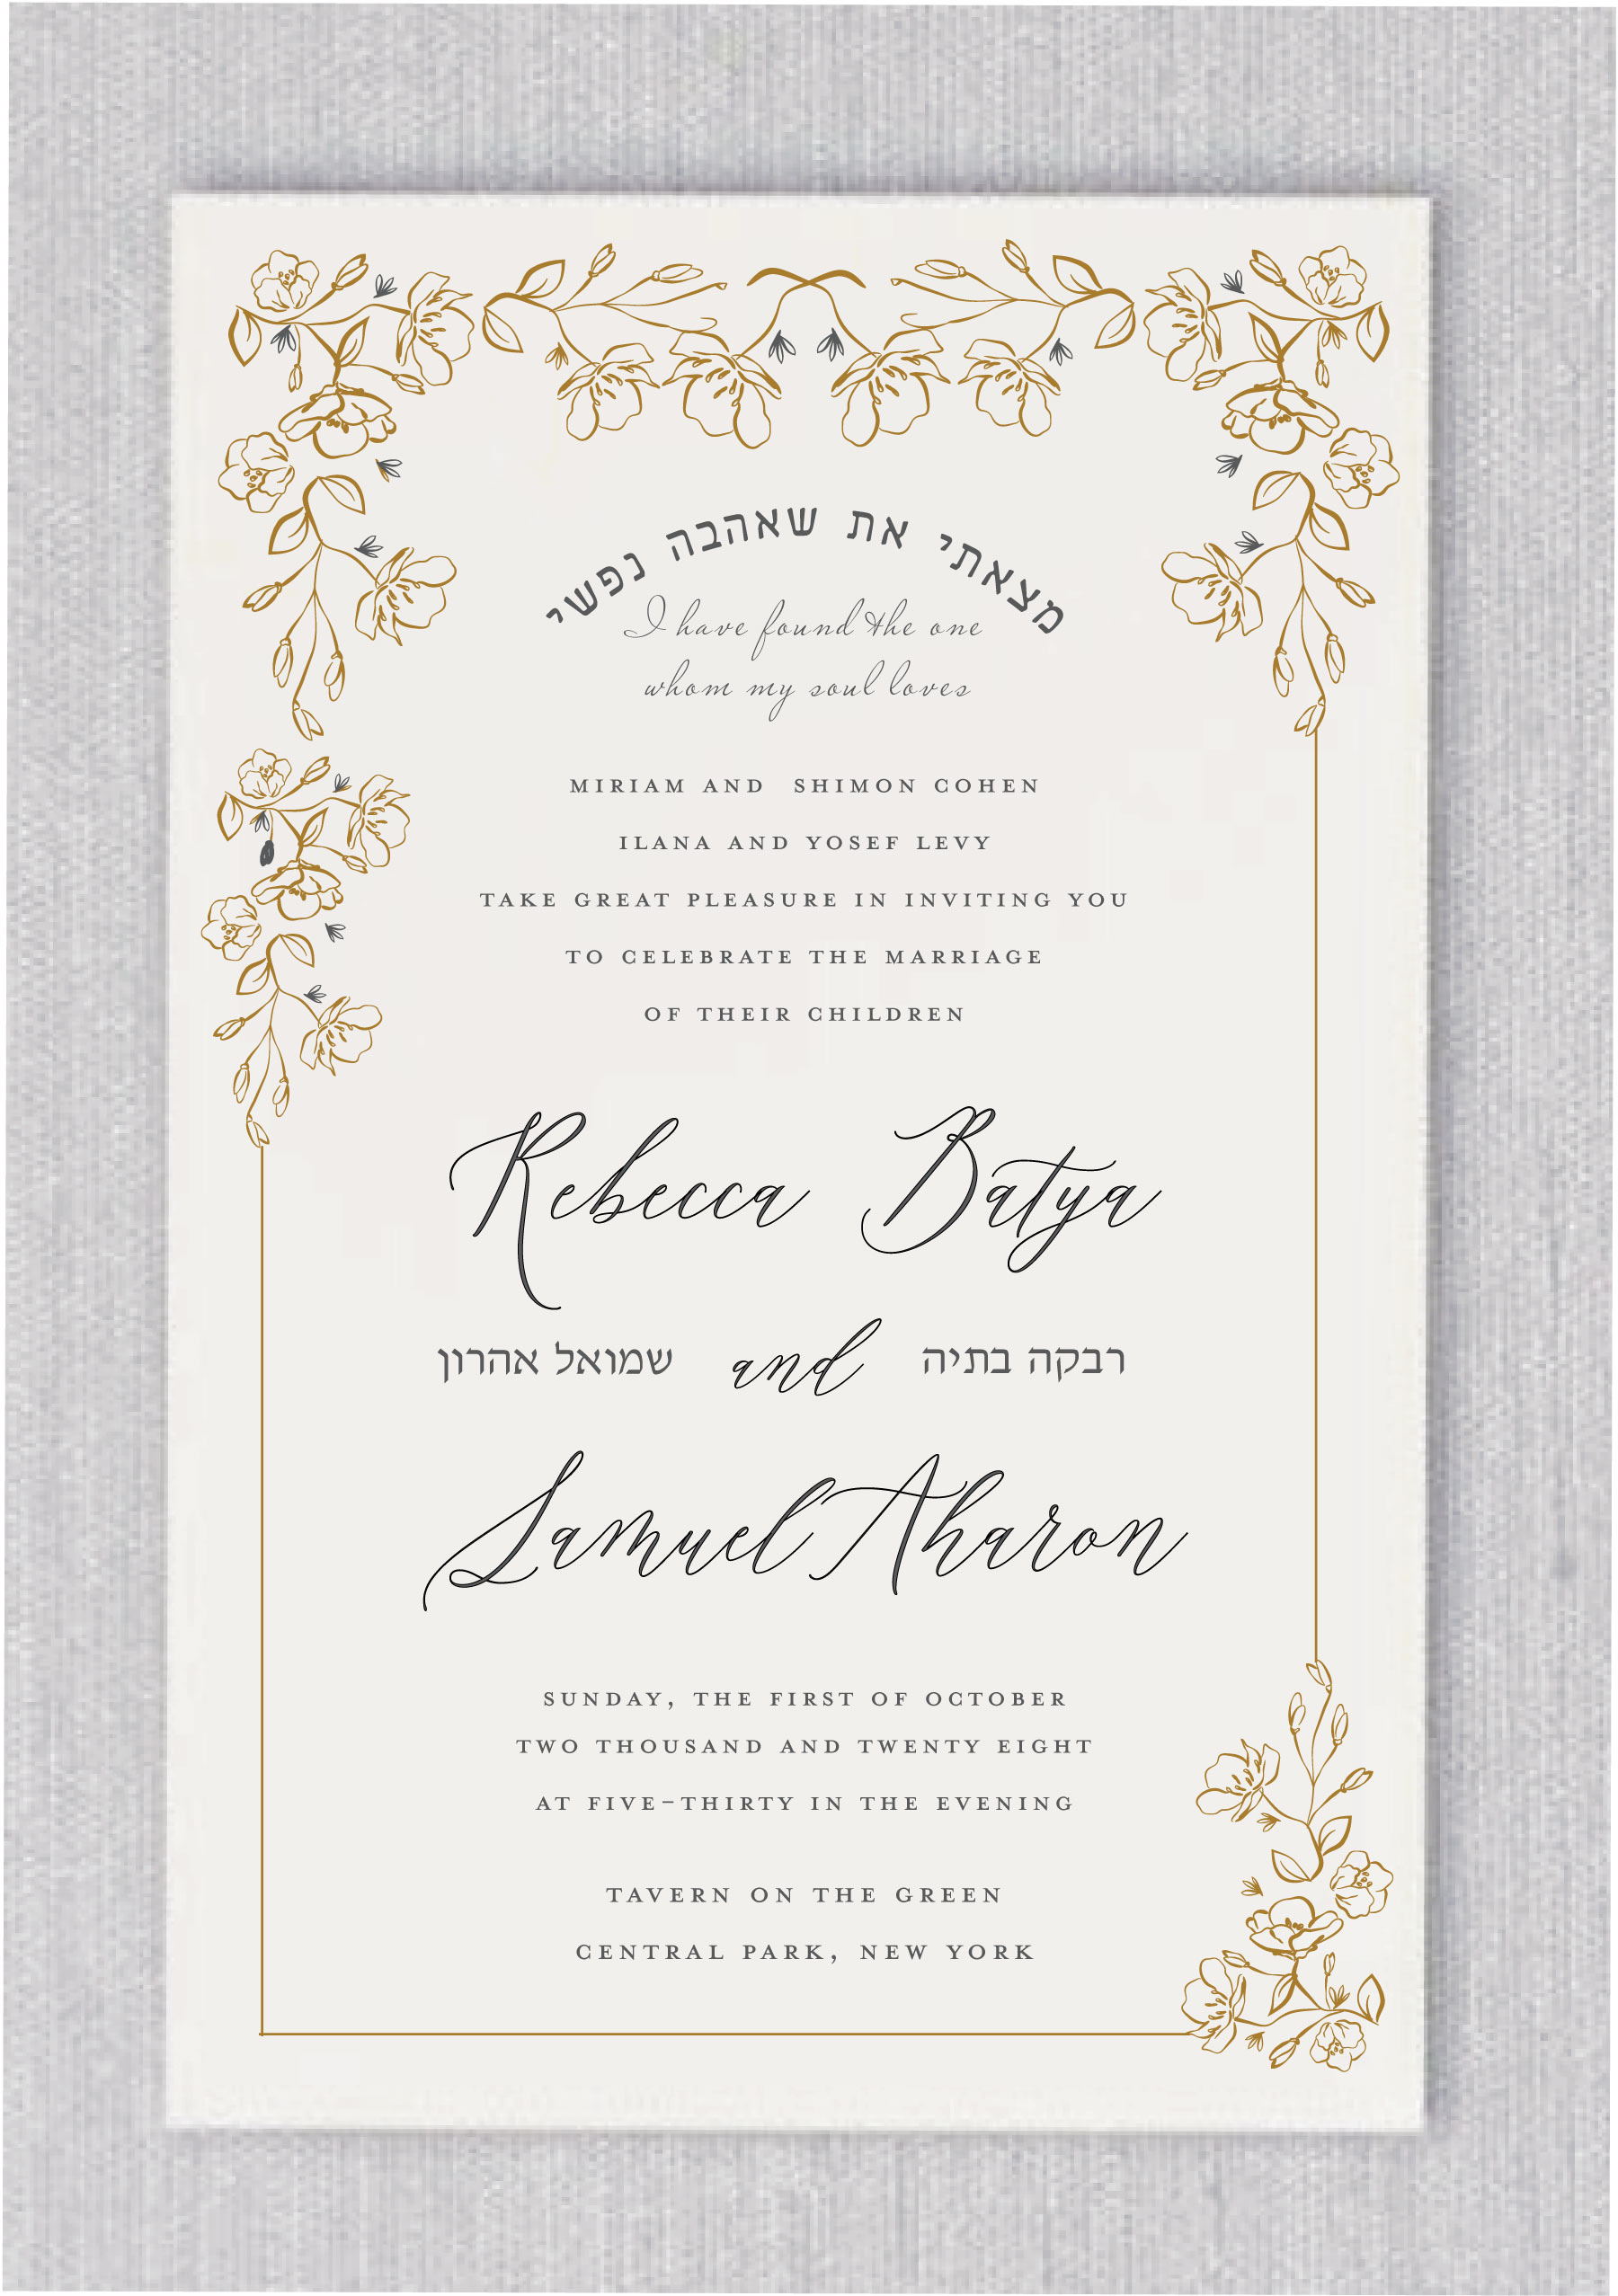 "Behold our Exquisite Romance Jewish Wedding Invitations, featuring a lavish partial floral border in opulent gold and dark smoke, embracing the invitation with unparalleled elegance. Positioned majestically at the top, the phrase 'I have found the one whom my soul loves' is delicately adorned in a captivating Hebrew arch, while its English counterpart graces below in regal sophistication. The names of the bride and groom are meticulously crafted in a resplendently fancy and elegant font, accompanied by their Hebrew counterparts, exuding timeless charm and refinement.